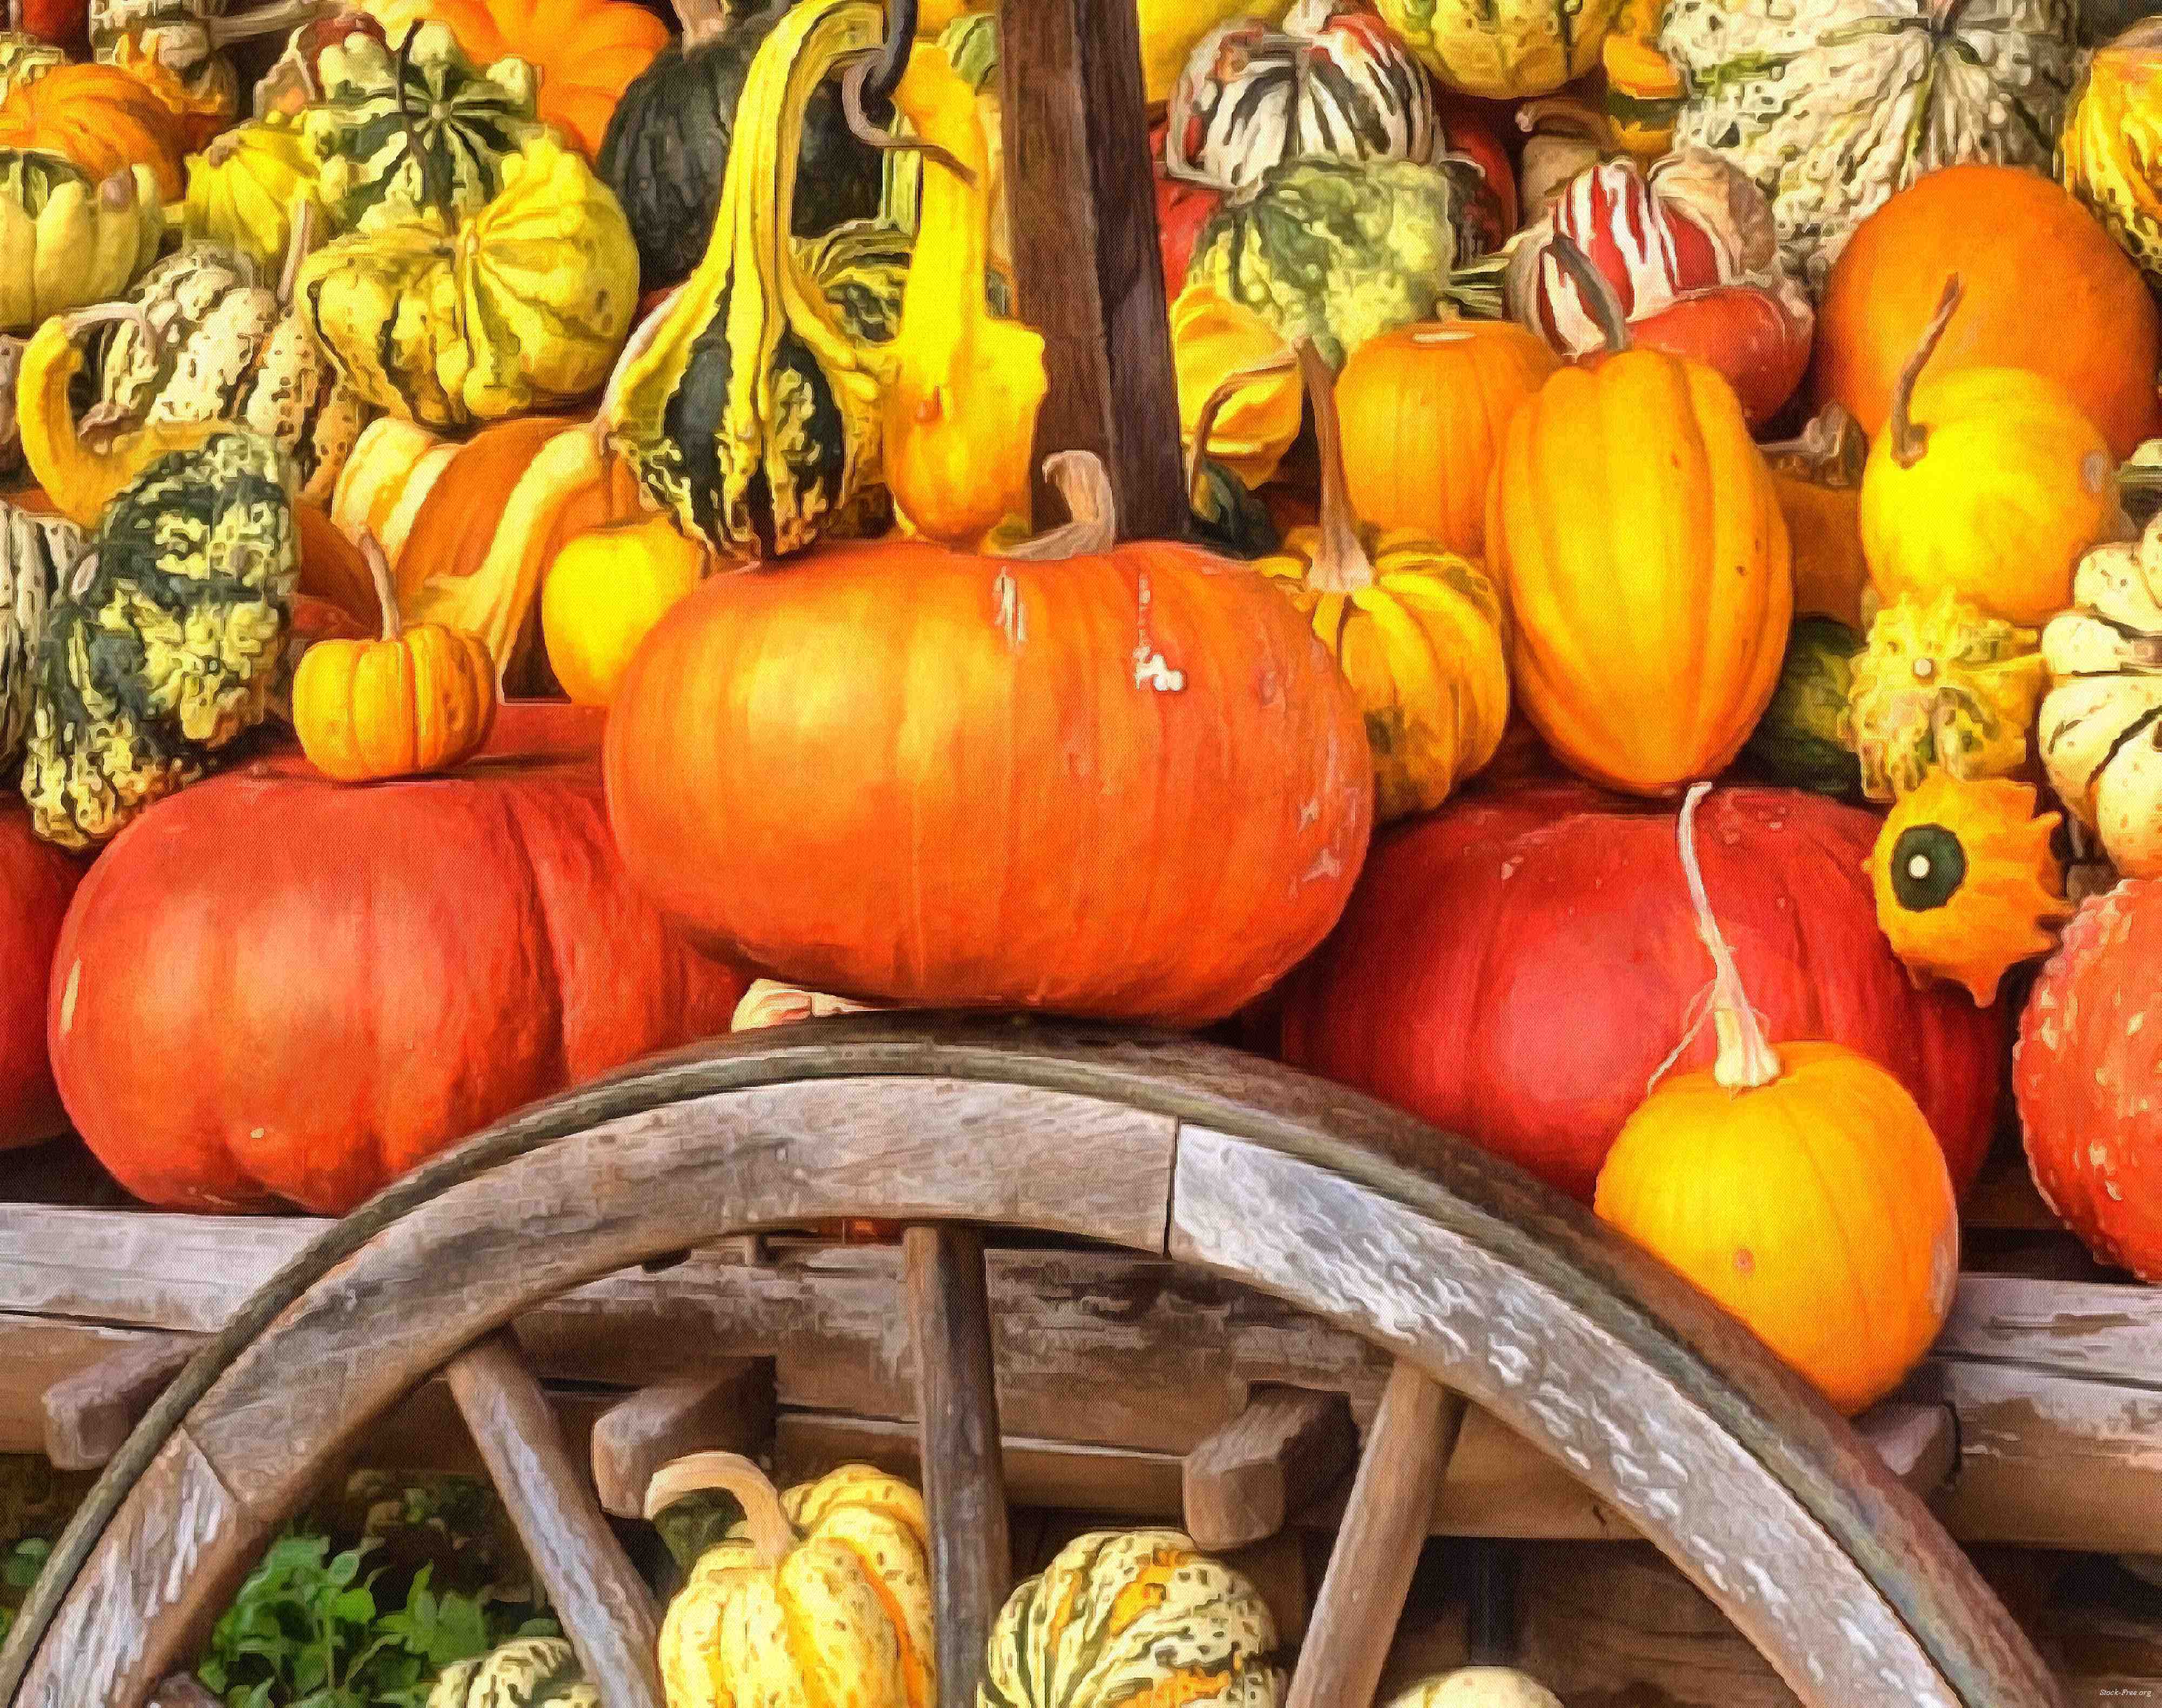 pumpkin, holiday, lots of pumpkins, garden, spooky, trick or treet, halloween -  stock free photos, public domain images, download free images, free stock images, public domain